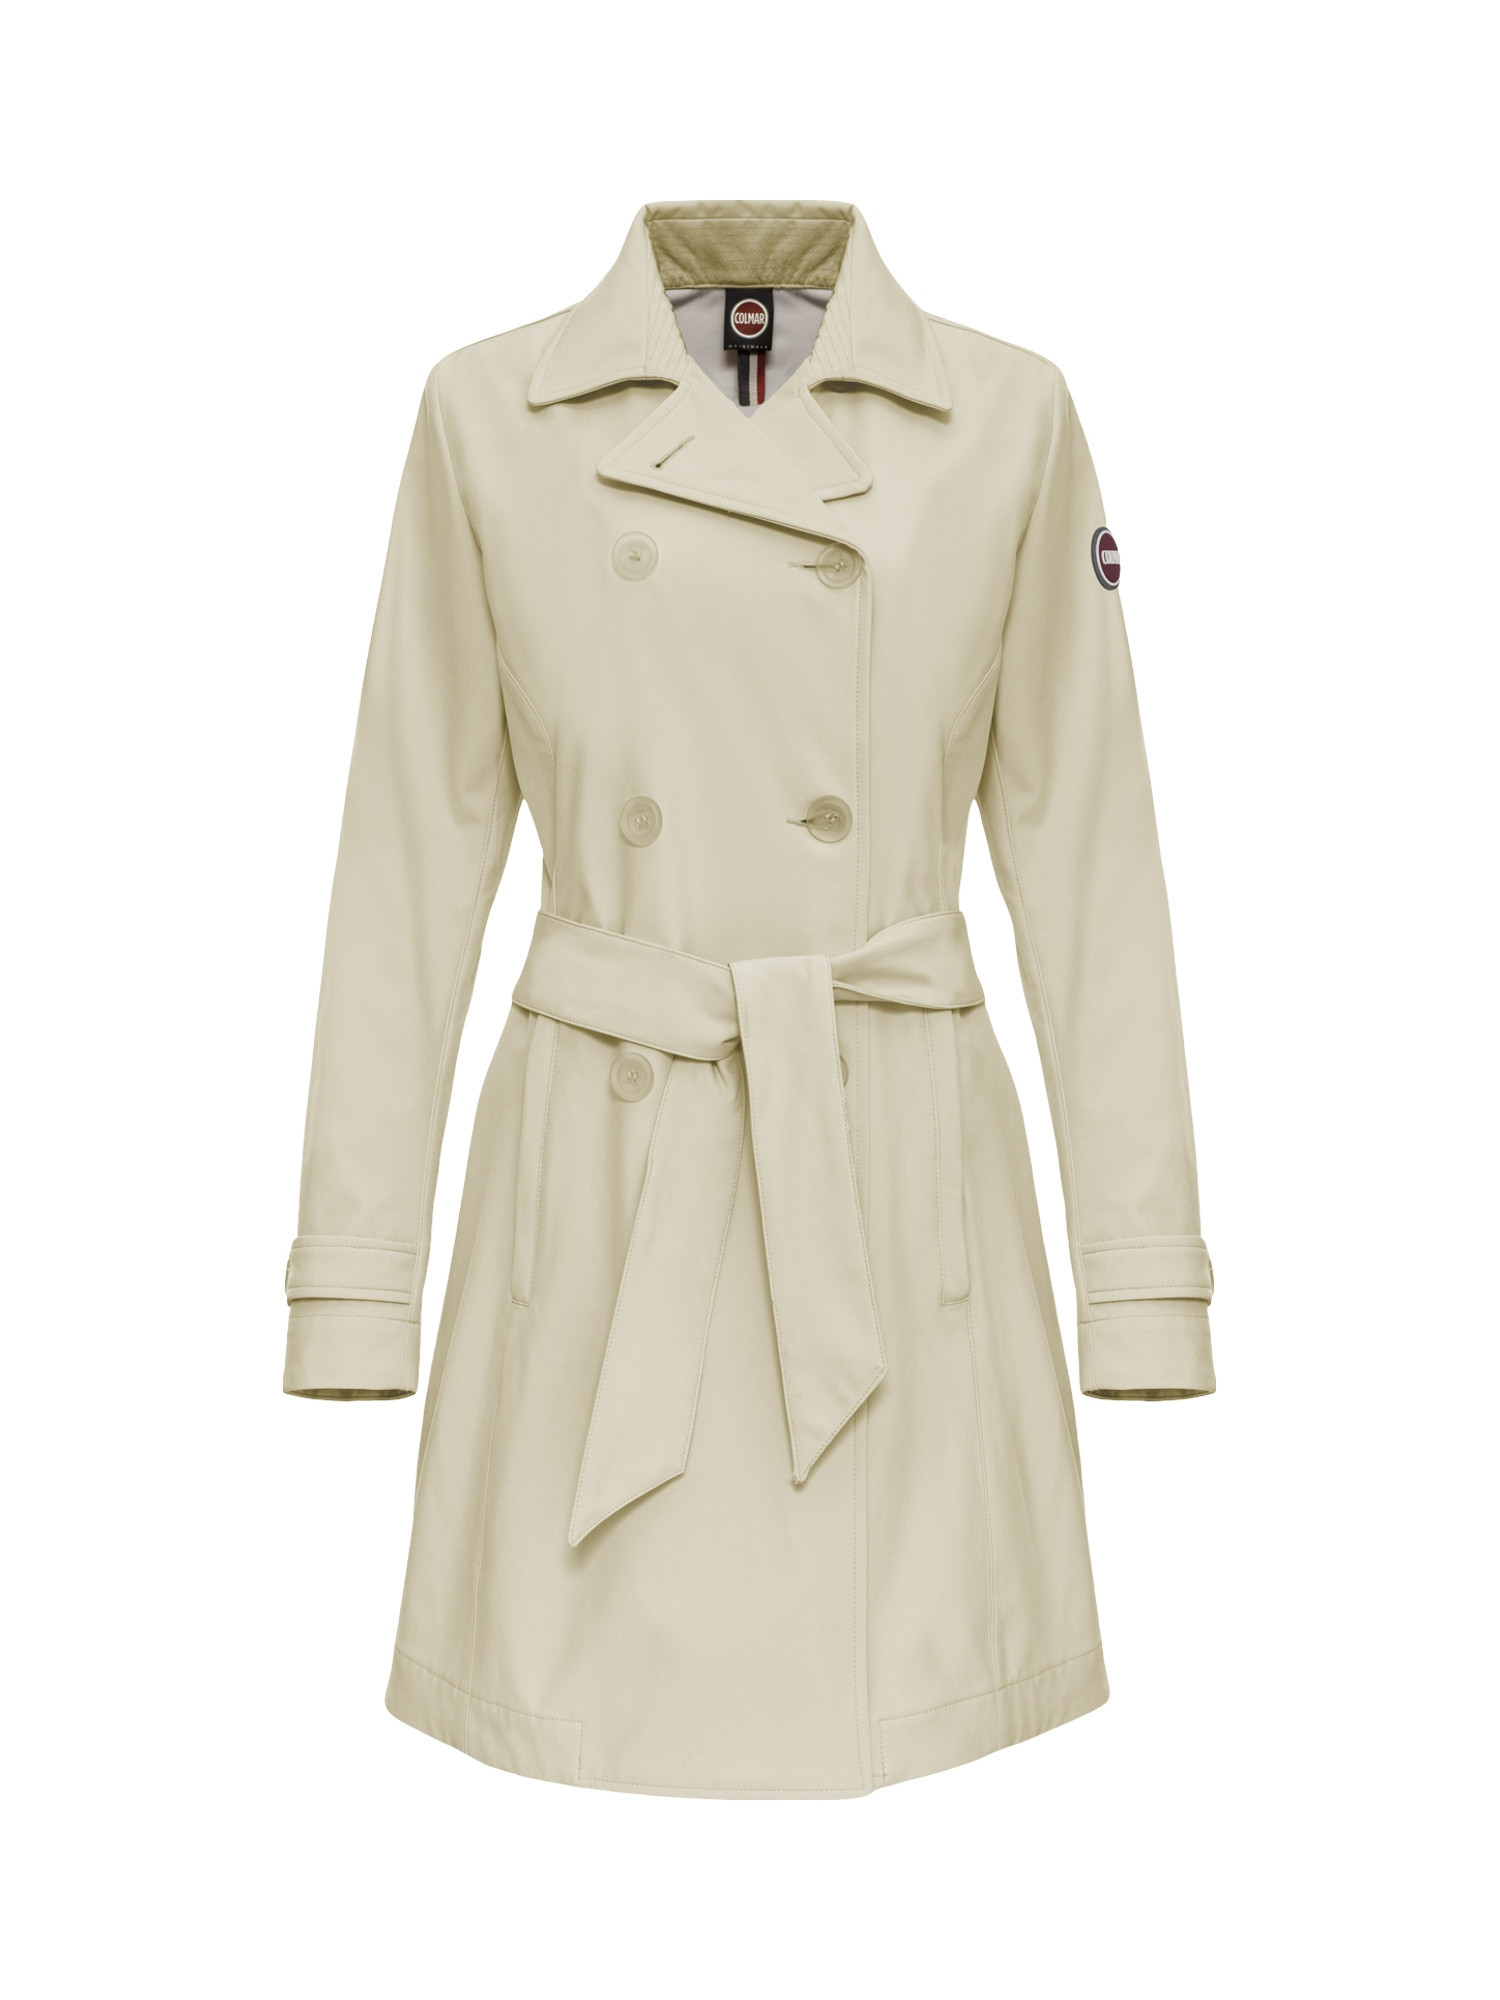 Colmar - Softshell trench jacket, White Cream, large image number 0